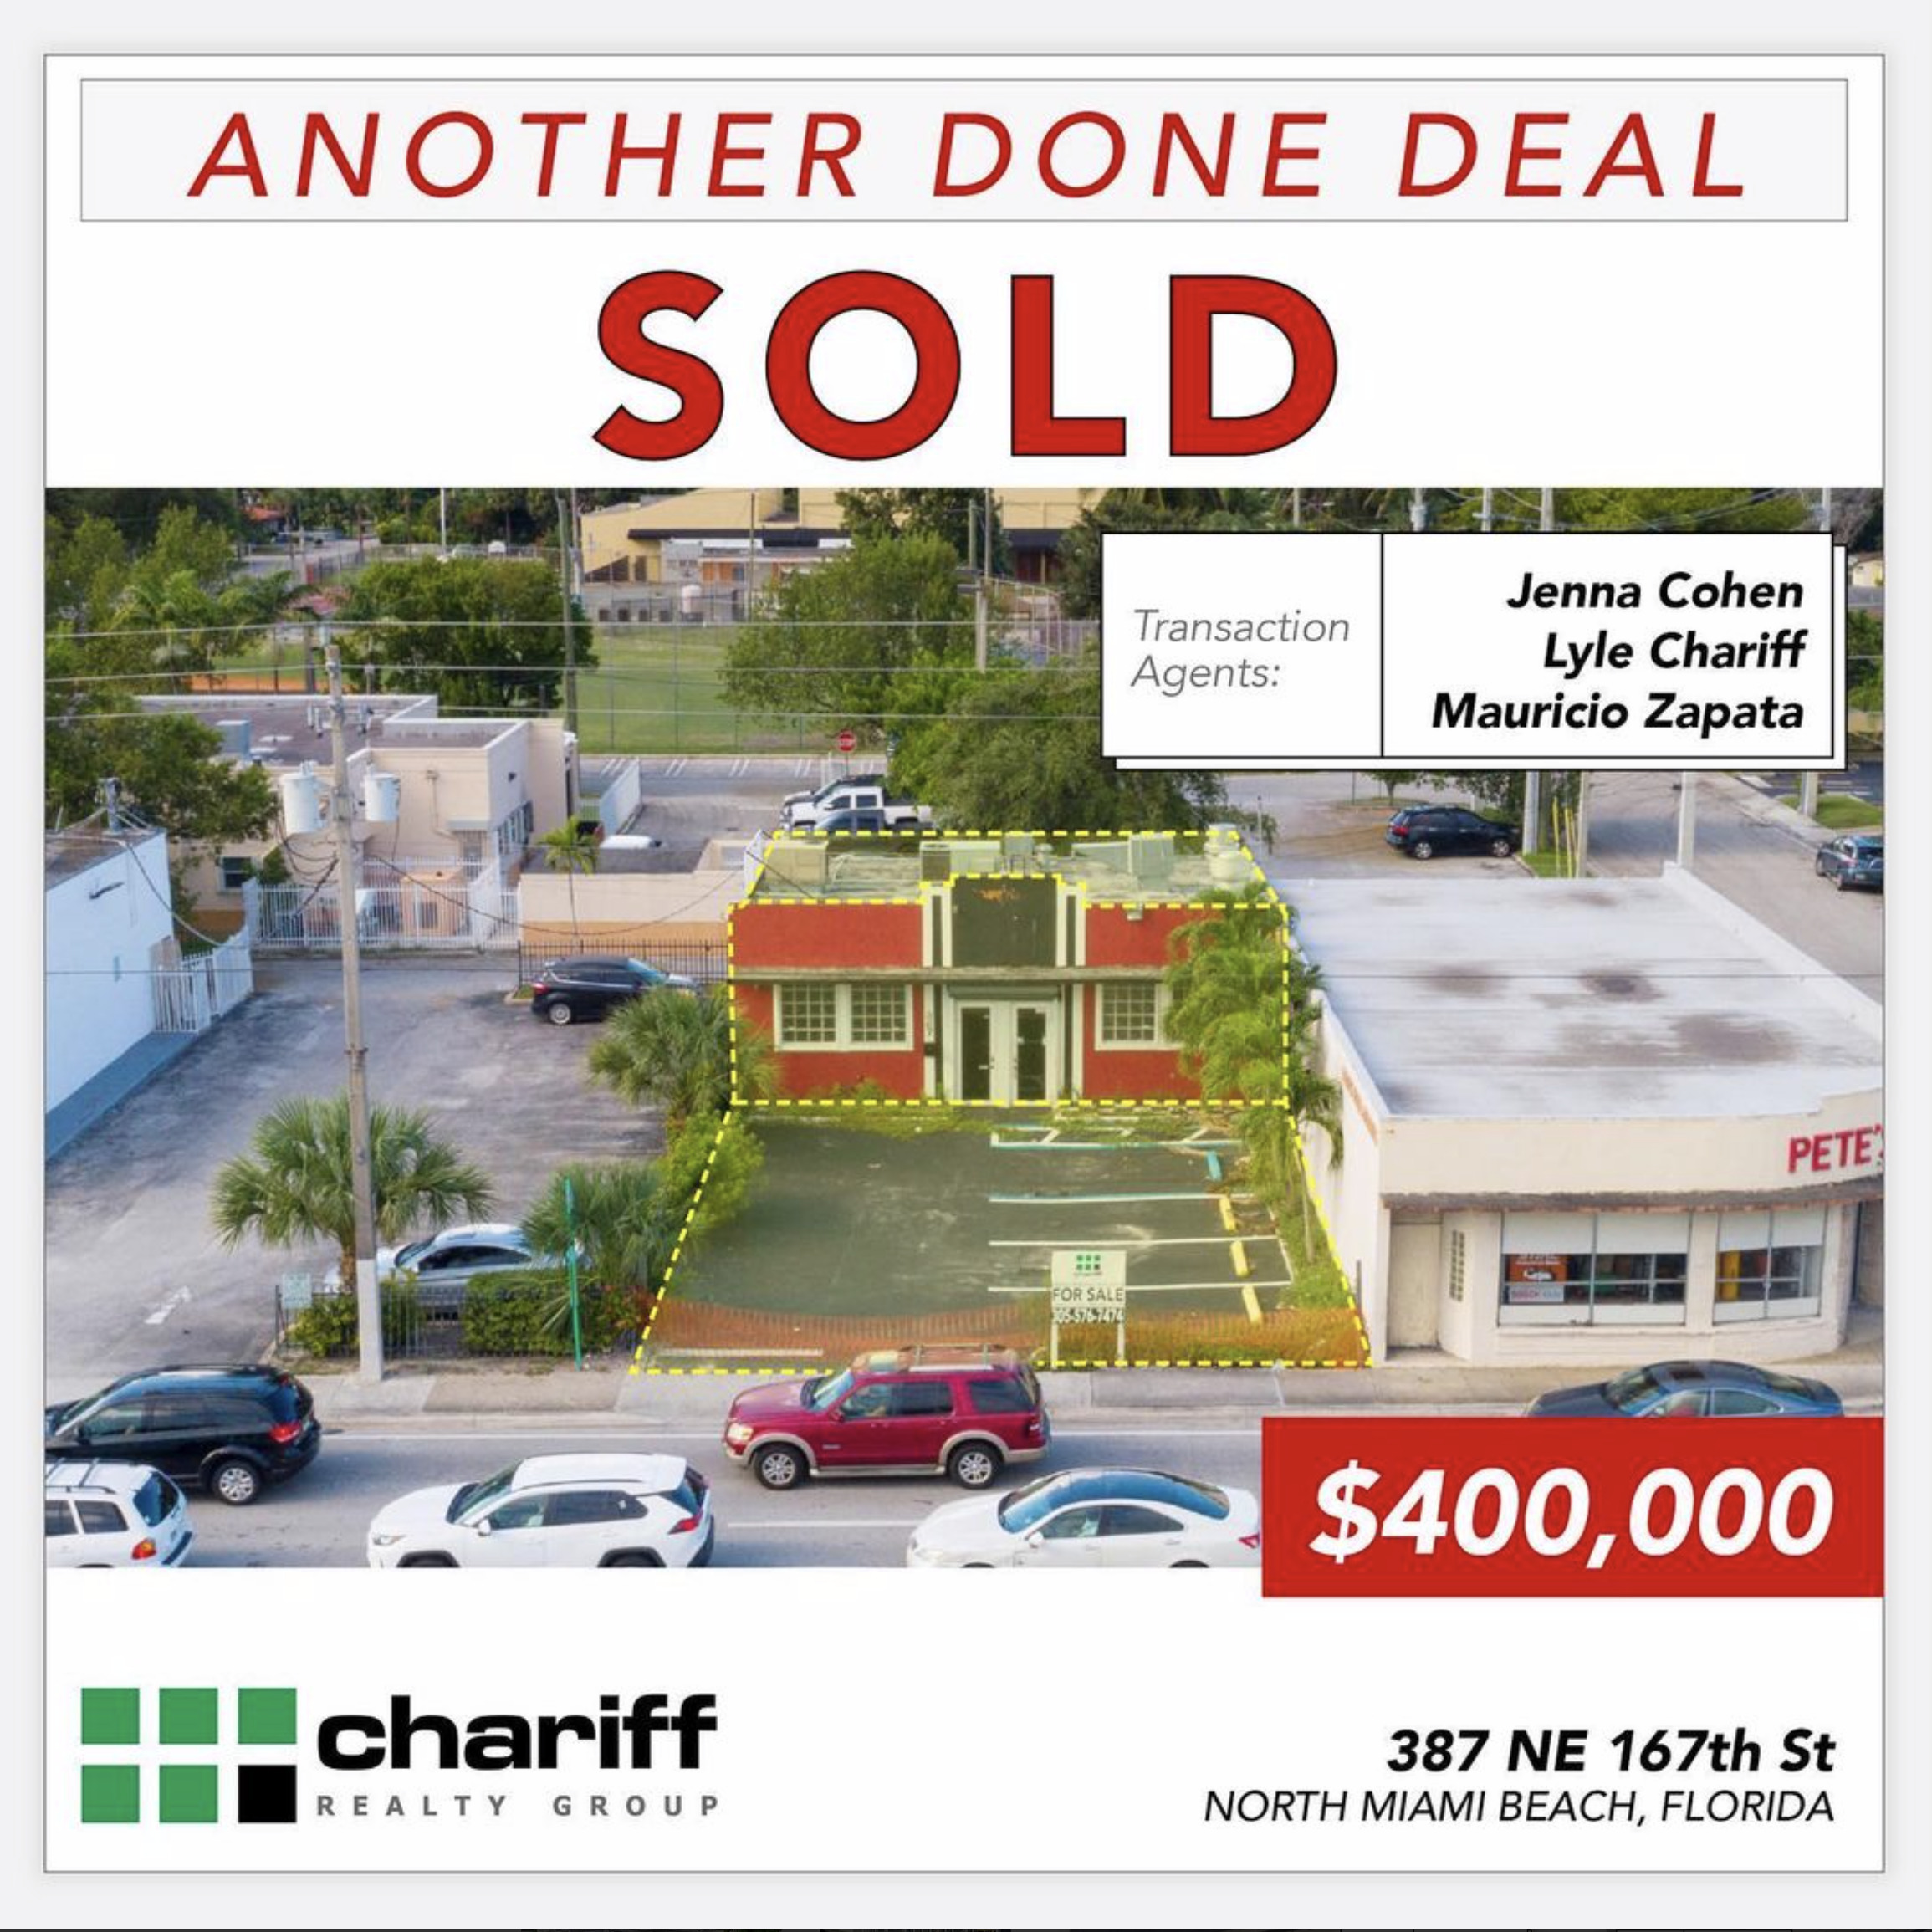 187 NE 167th St - Another Done Deal Sold - North Miami Beach - Florida 33162 - Chariff Realty Group